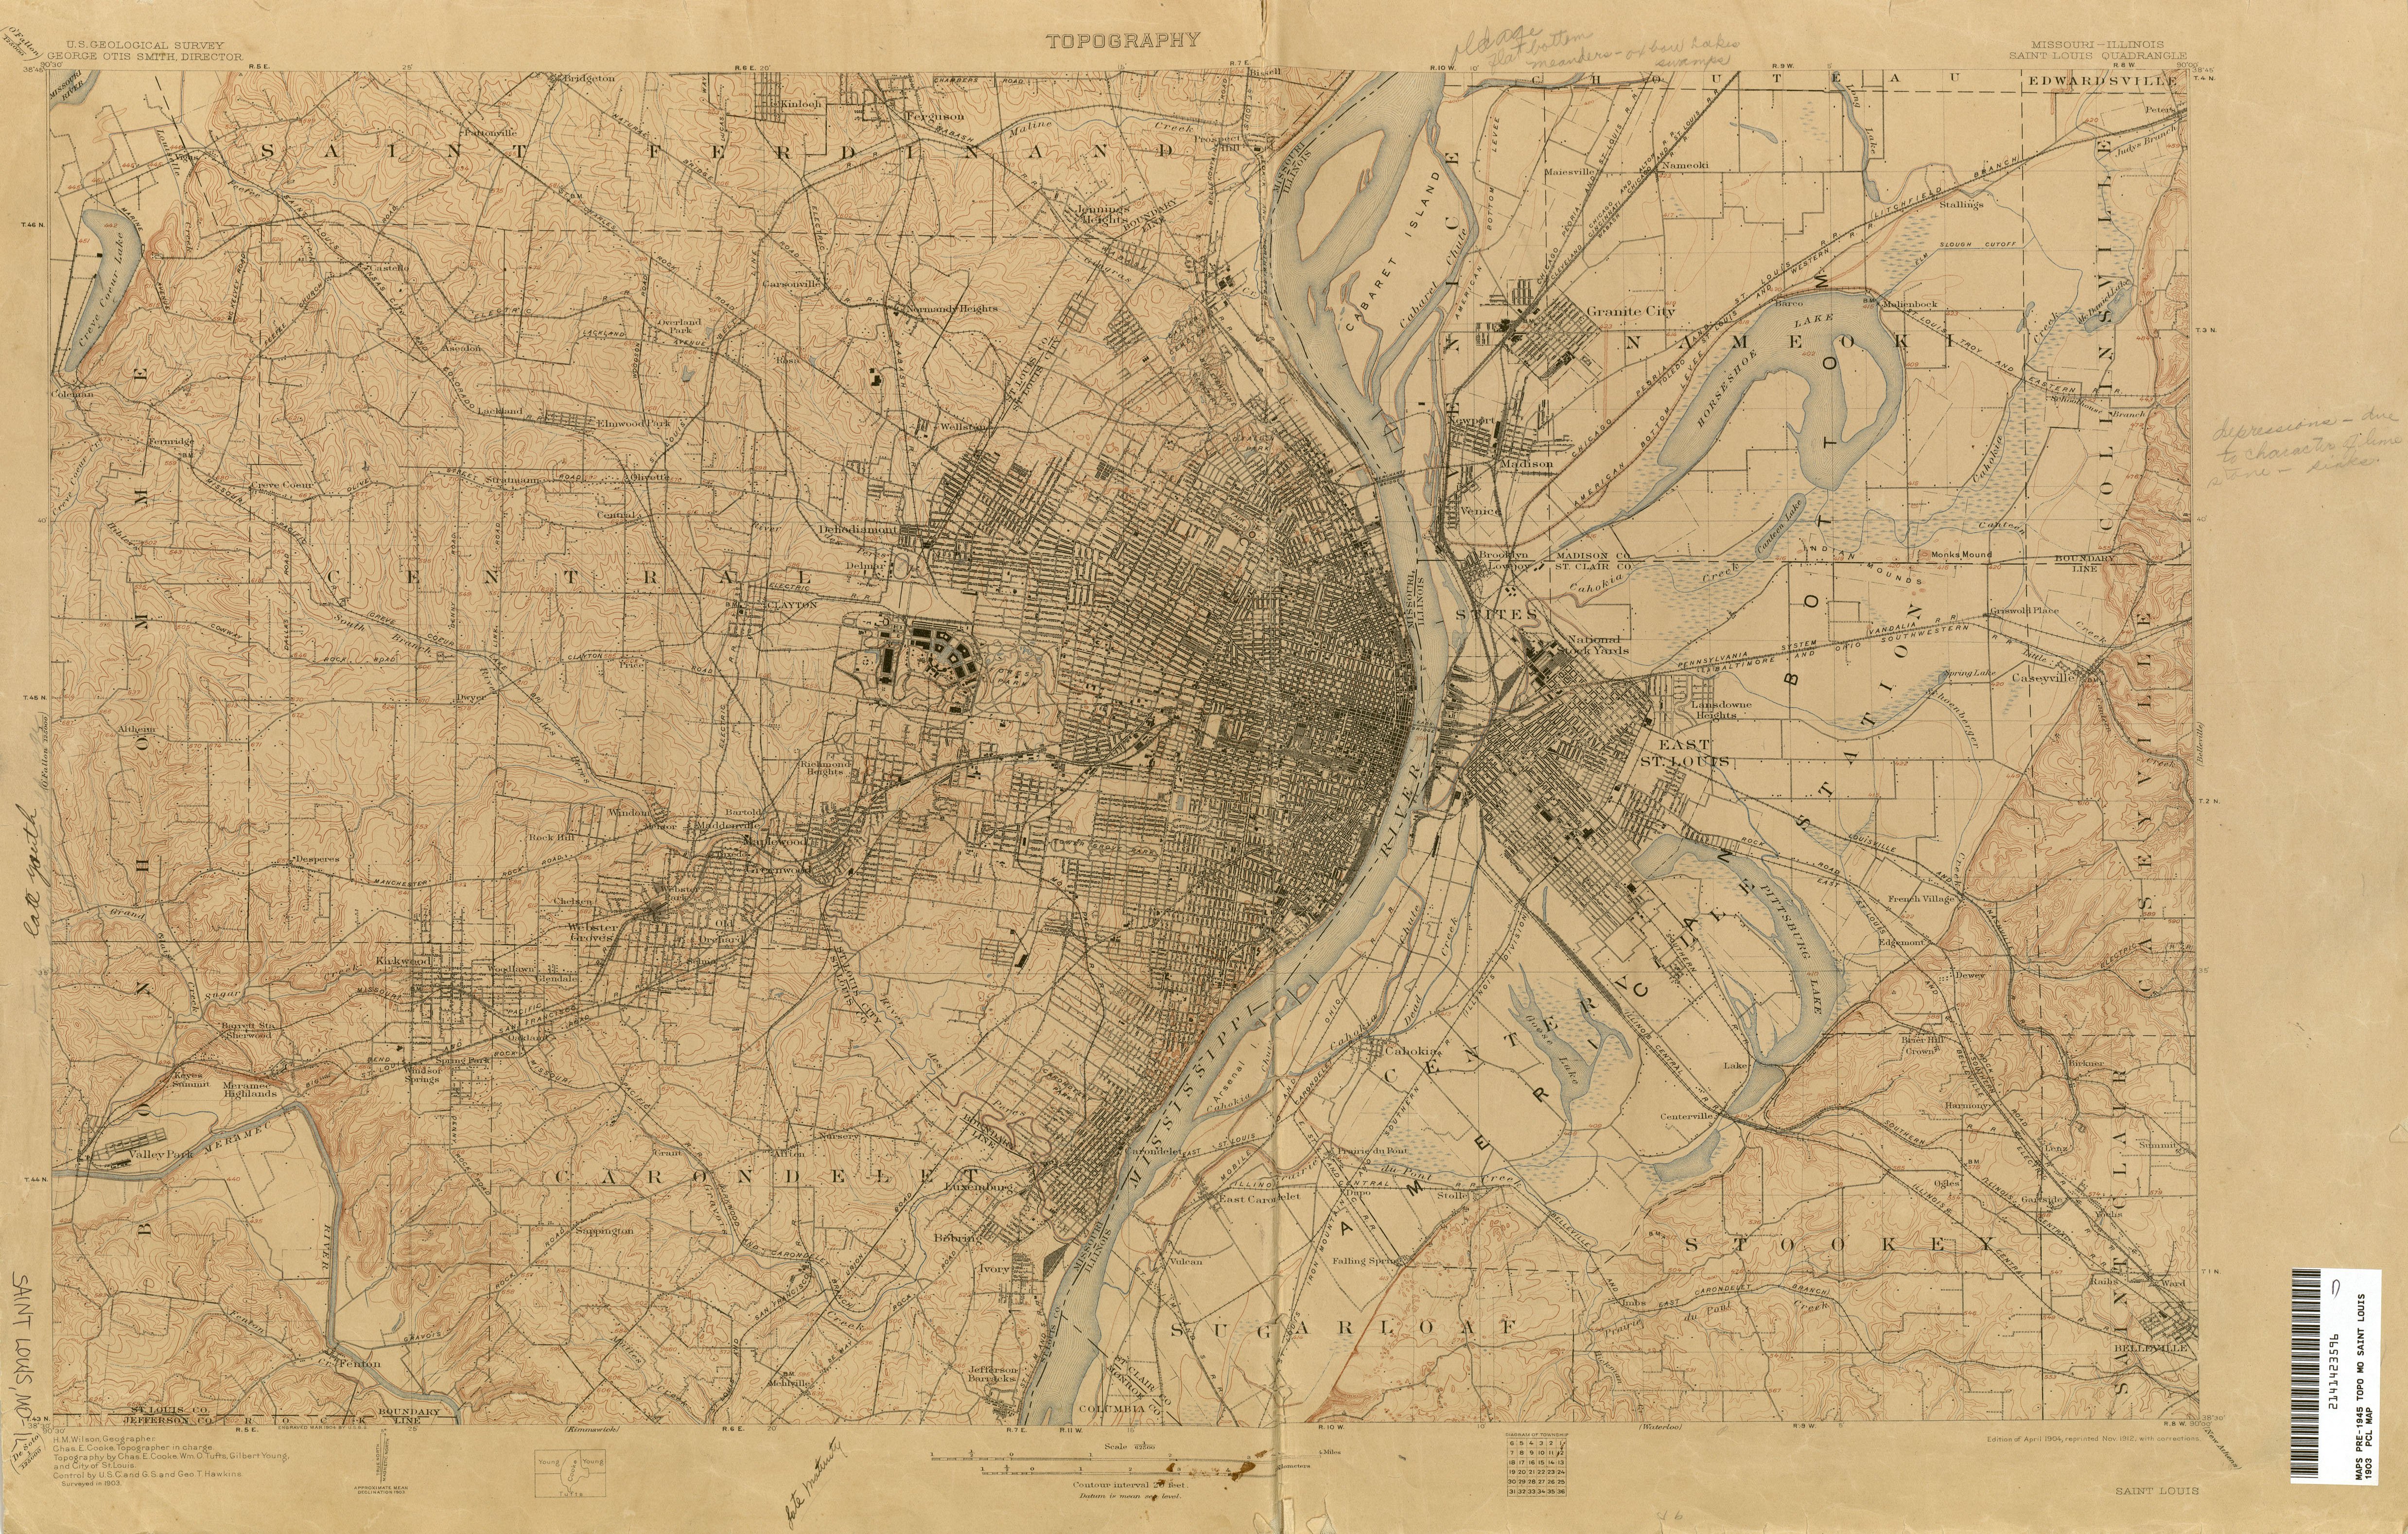 Topographic map of St Louis, MO - 1903 [4954x3156] : MapPorn